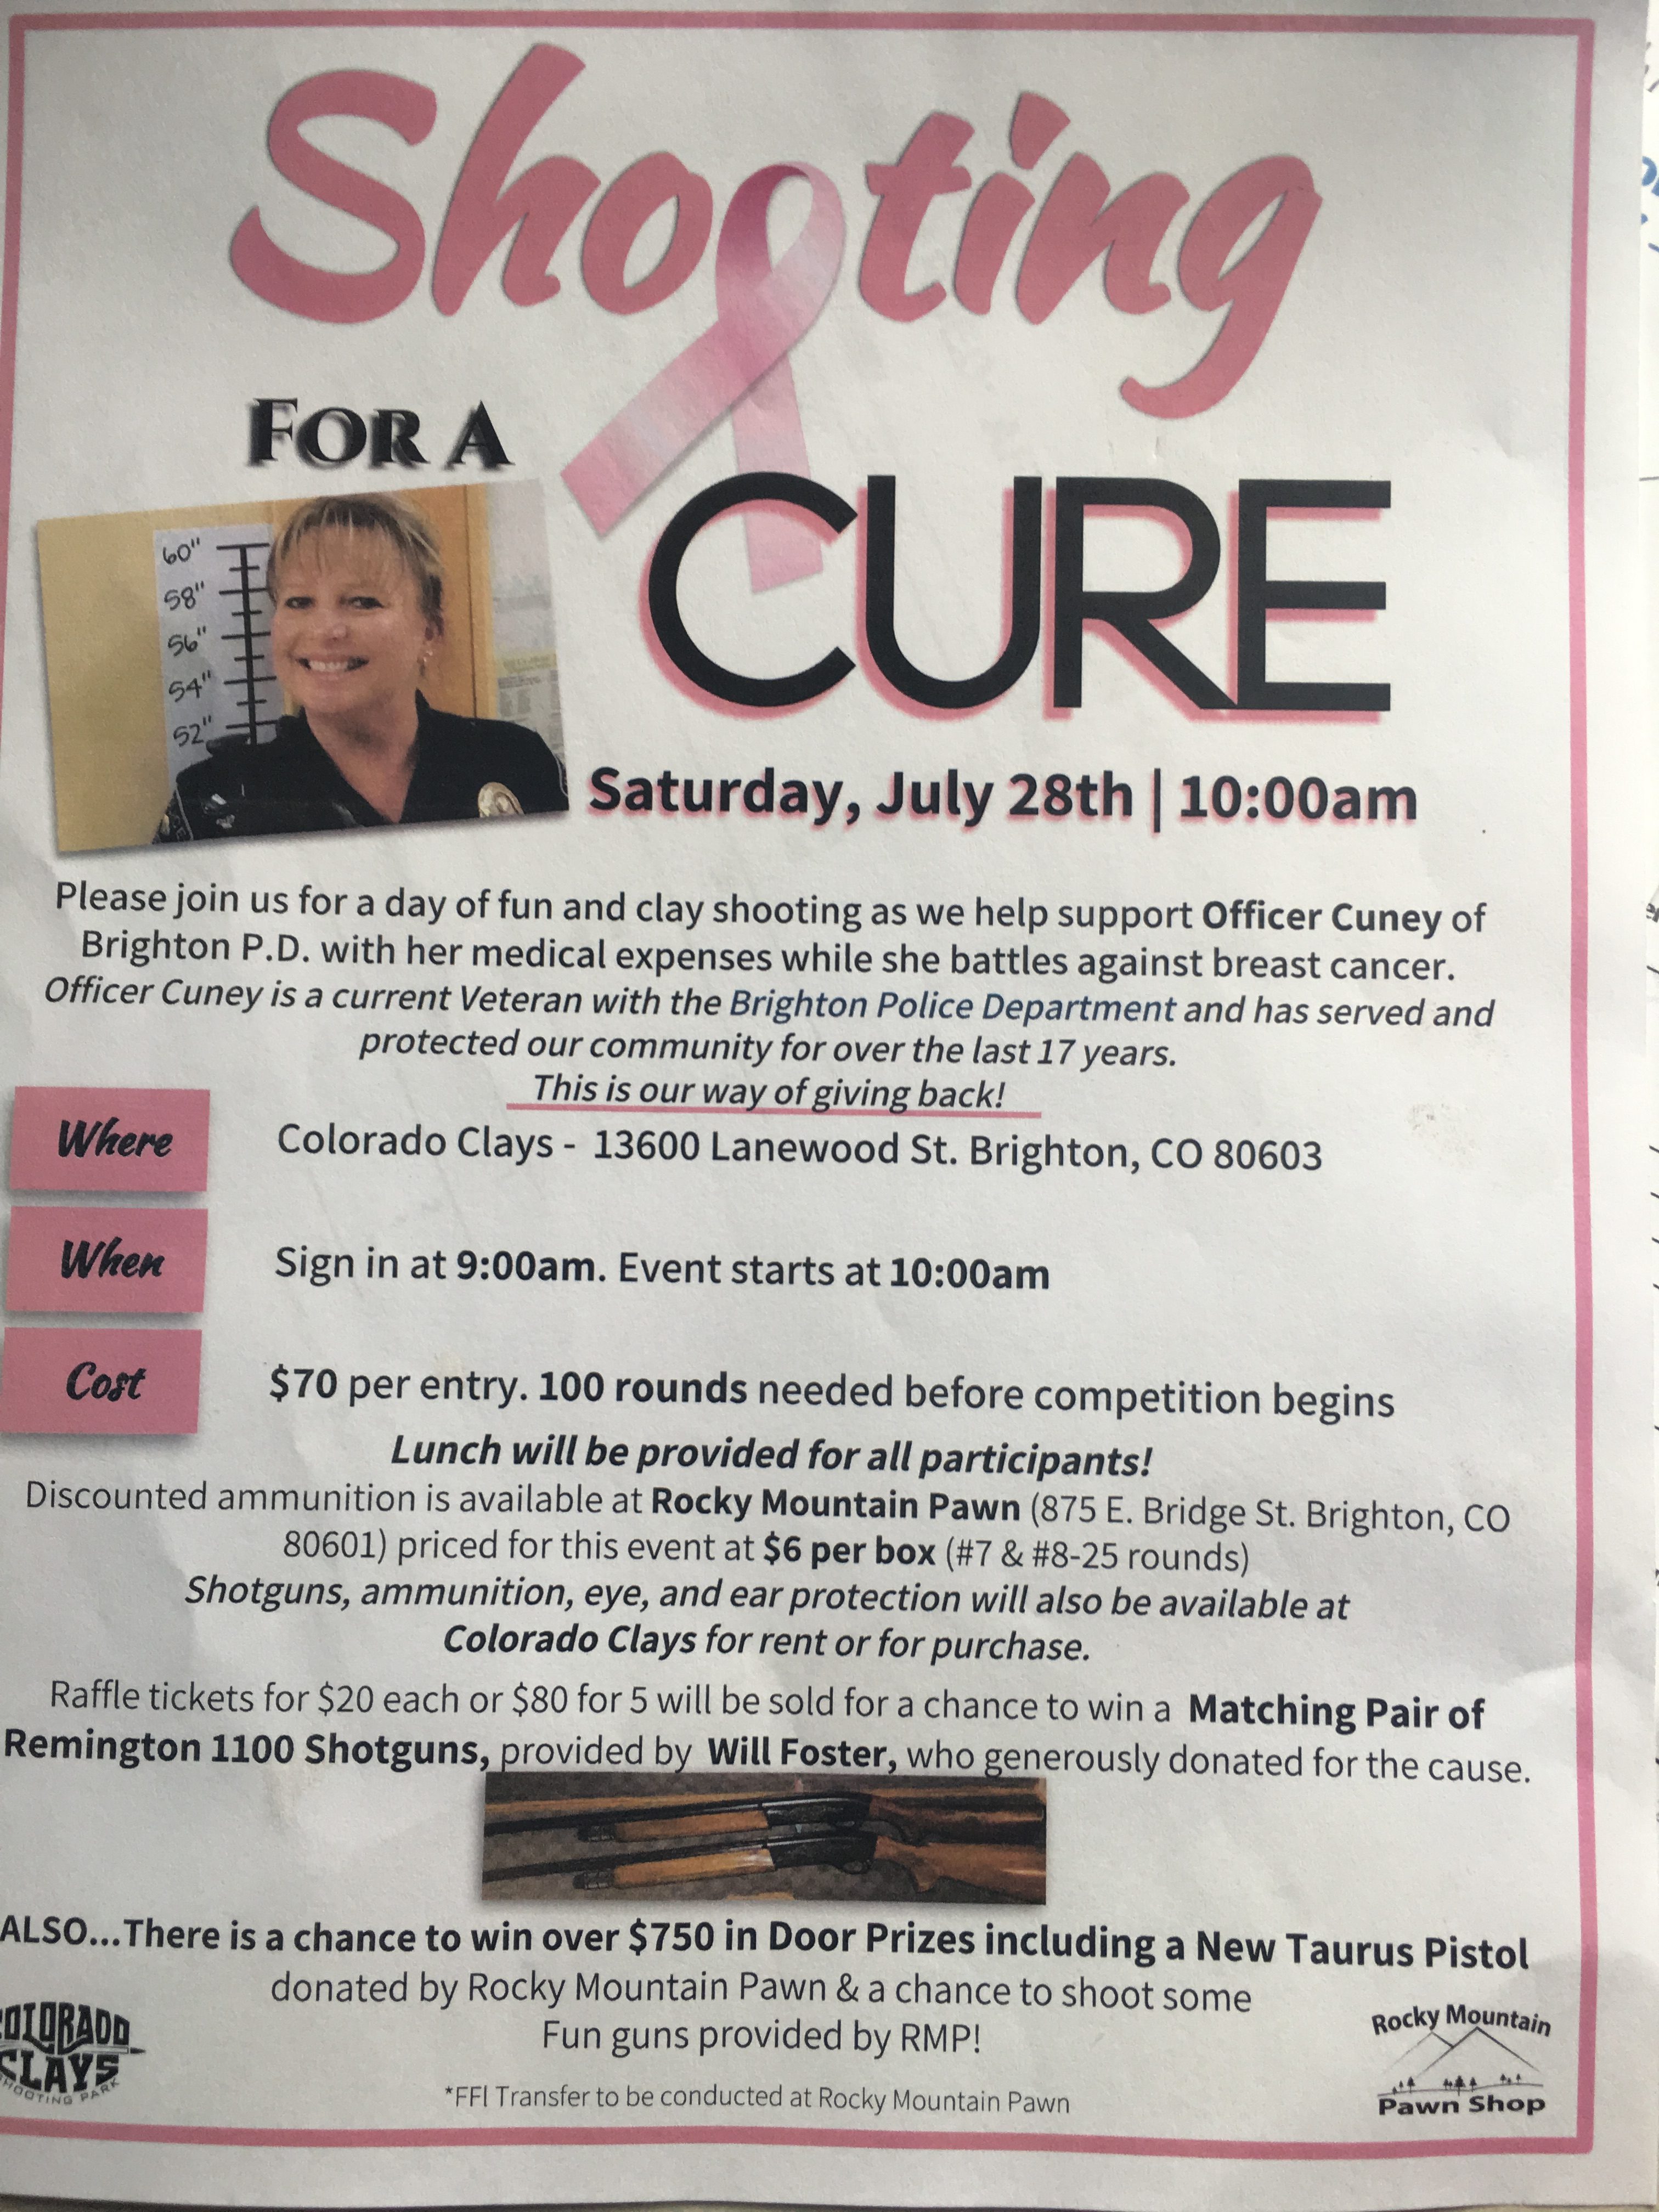 Shooting for a Cure - Benefitting Officer Cuney